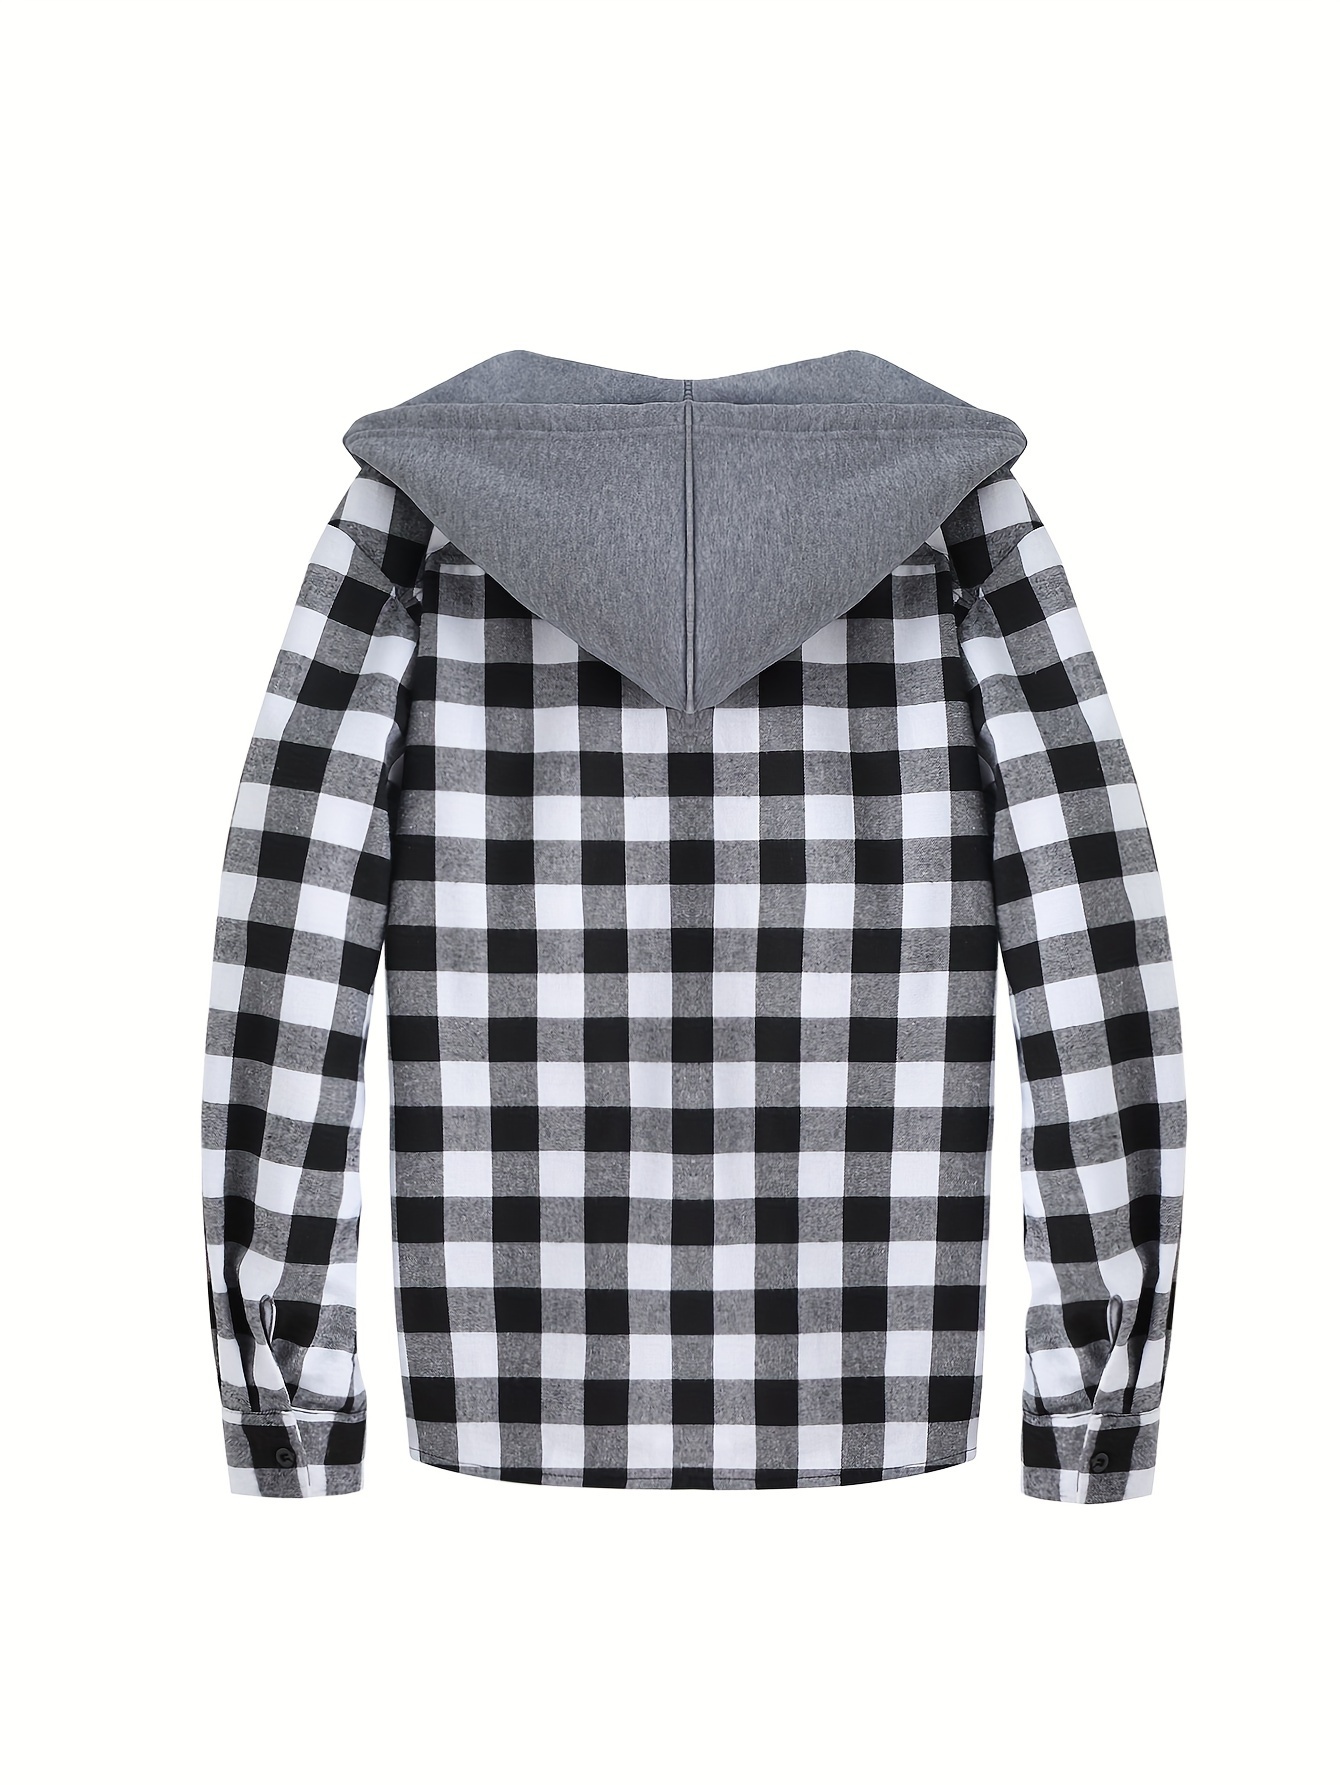 long sleeve casual regular fit button up hooded shirts jacket plaid shirt coat for men details 46